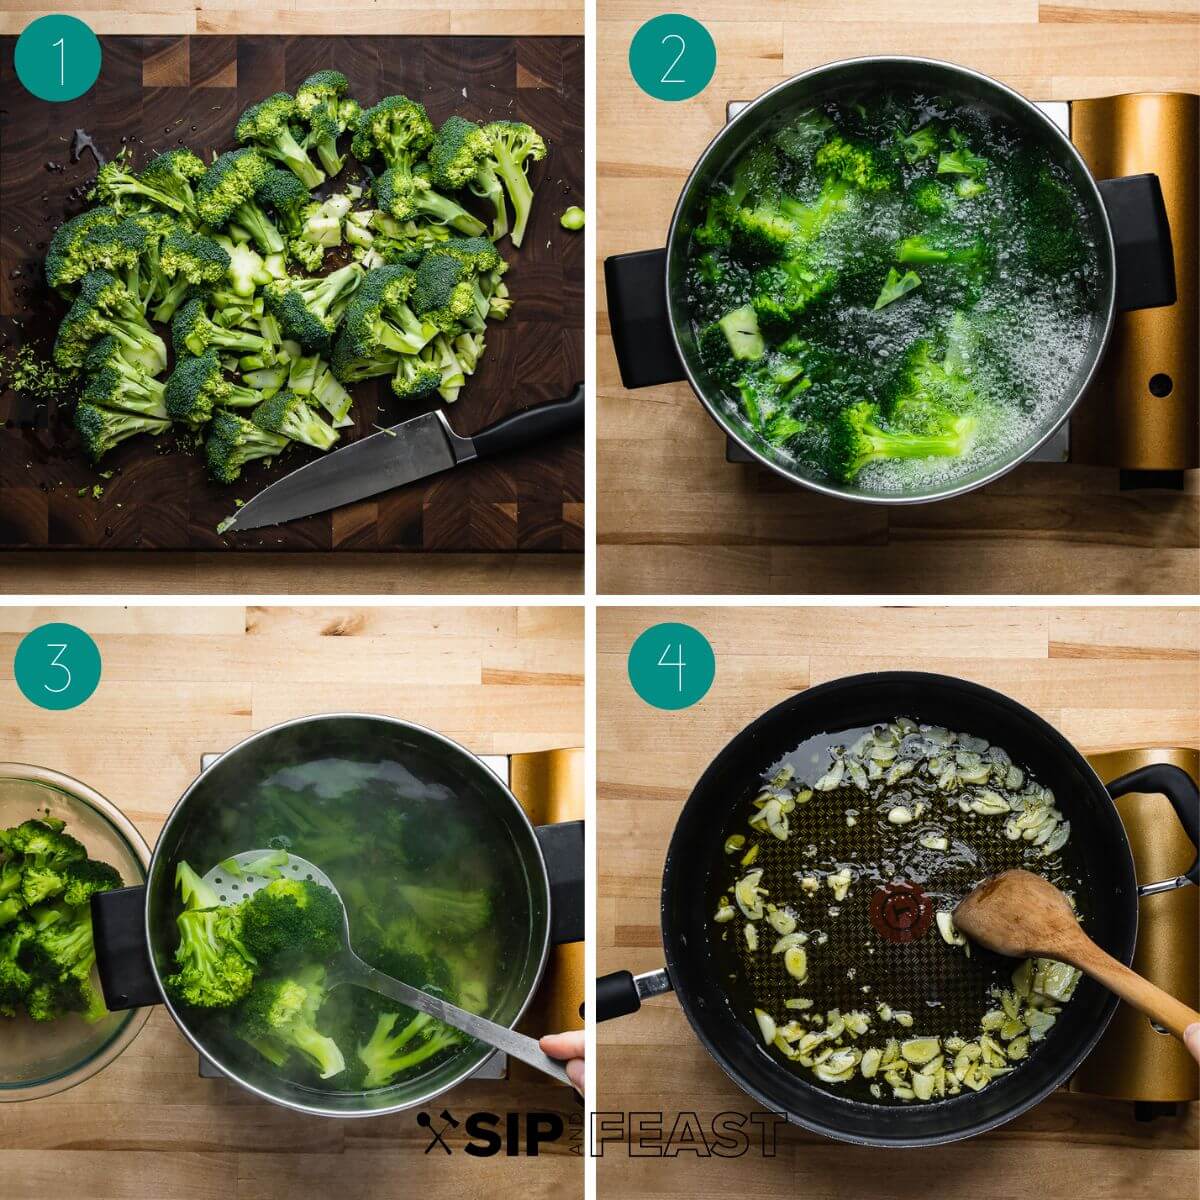 Pasta con broccoli recipe process shot collage group number one.